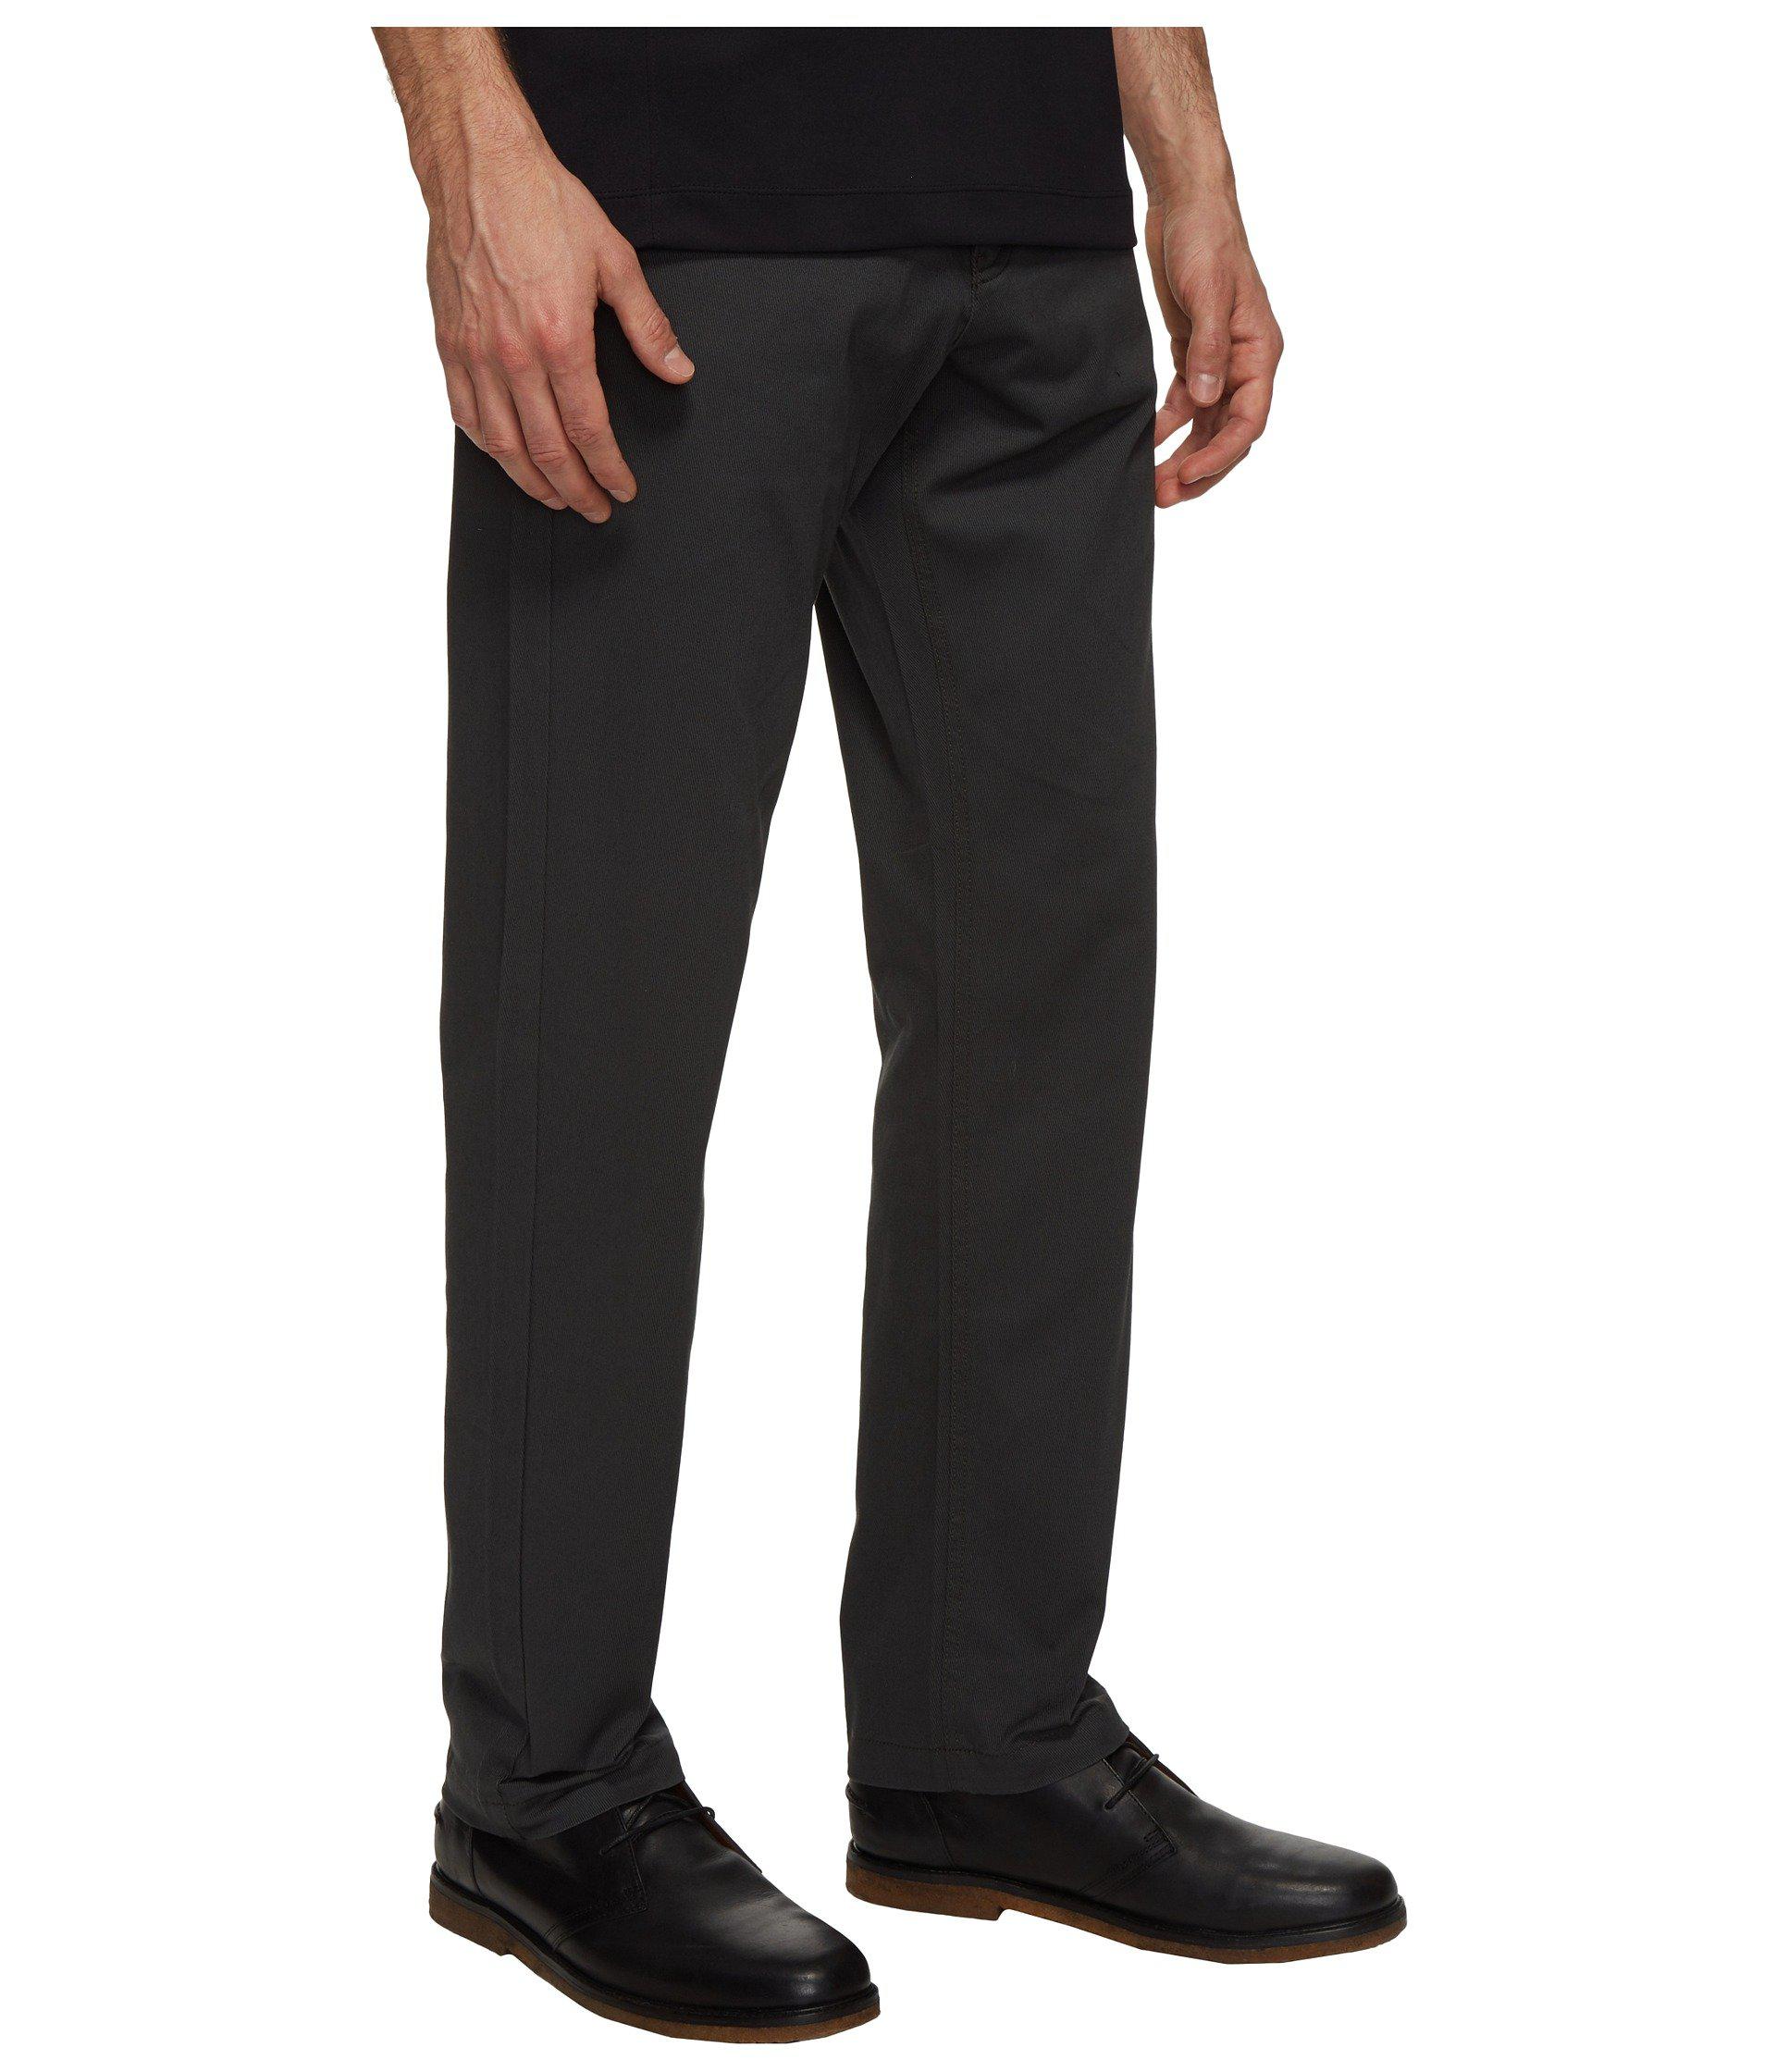 Calvin Klein Stretch Calvary Twill Pant in Black for Men - Lyst